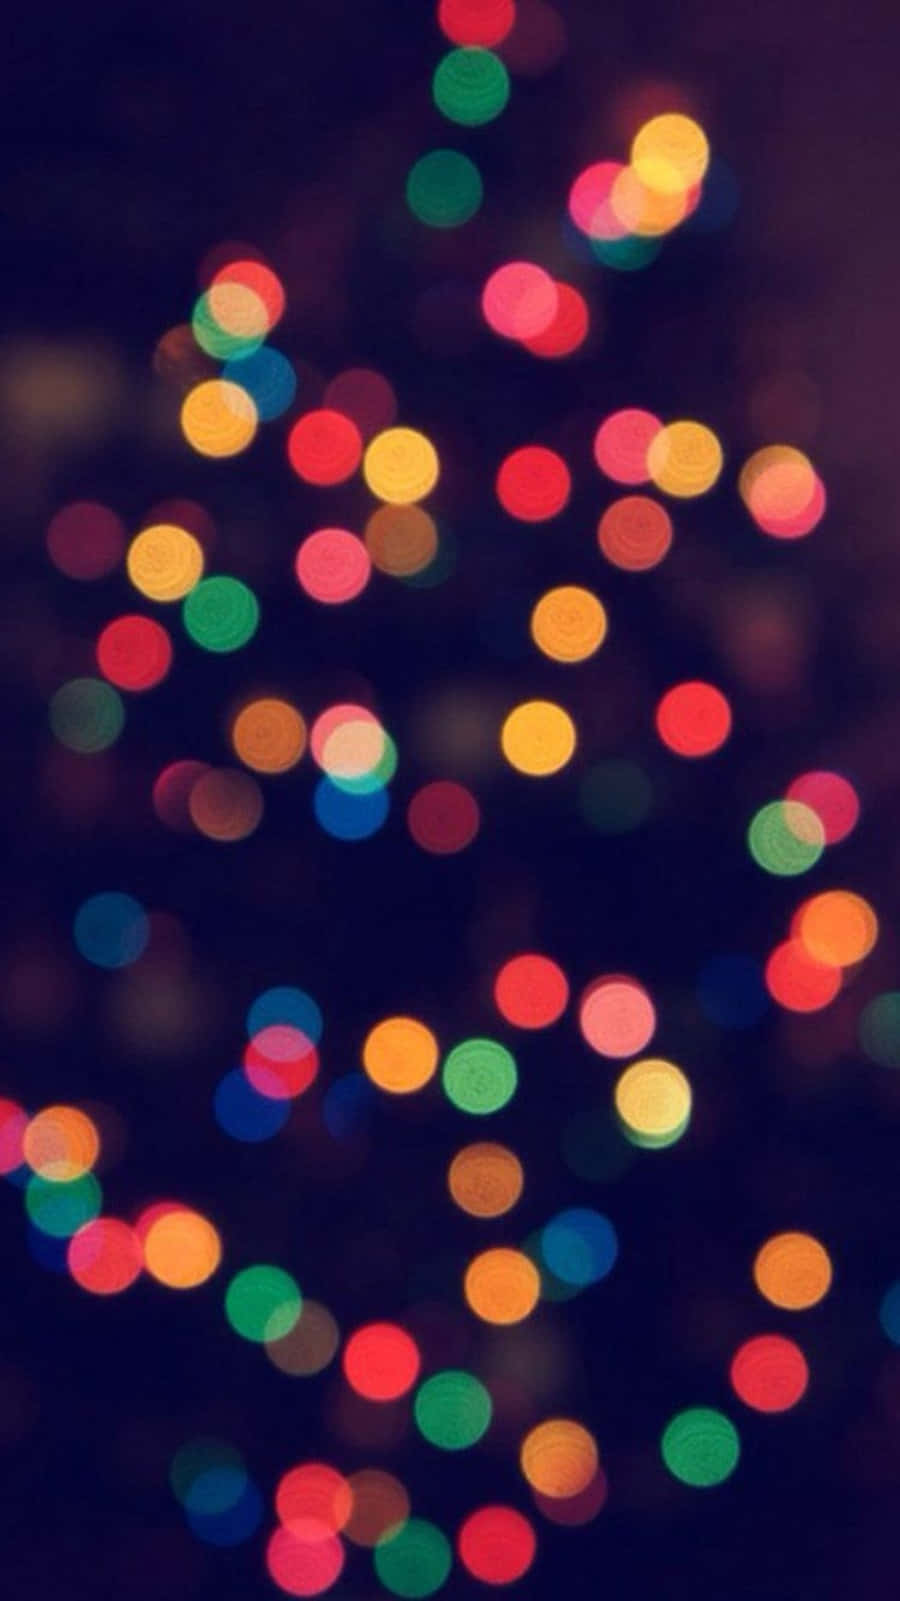 Spread the cheer with this cute Christmas phone! Wallpaper